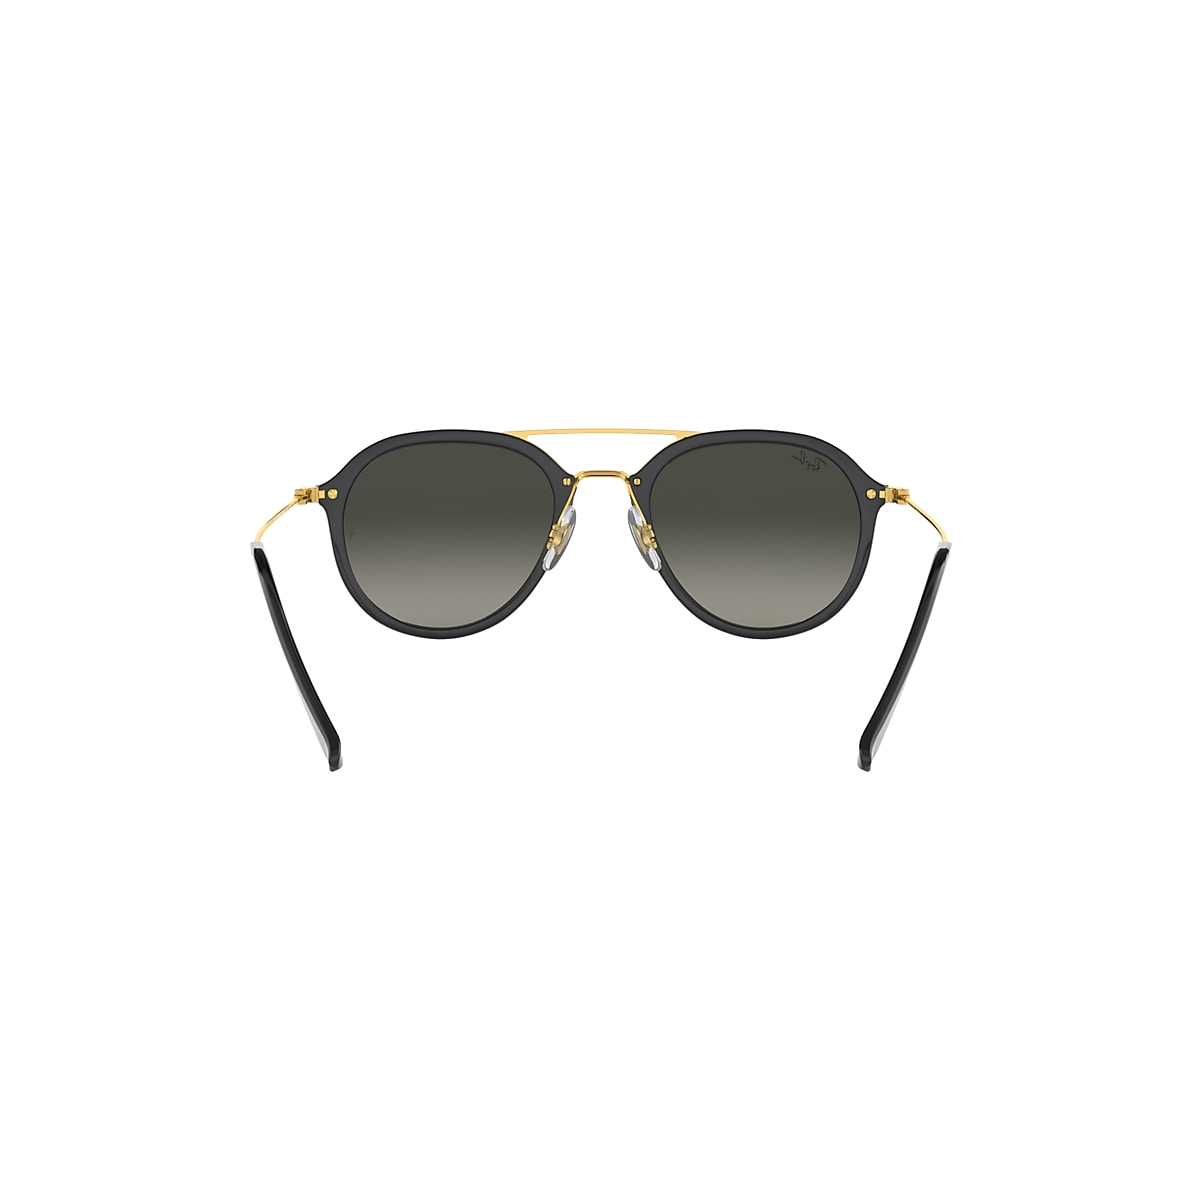 Rb4253 Sunglasses in Black and Grey | Ray-Ban®